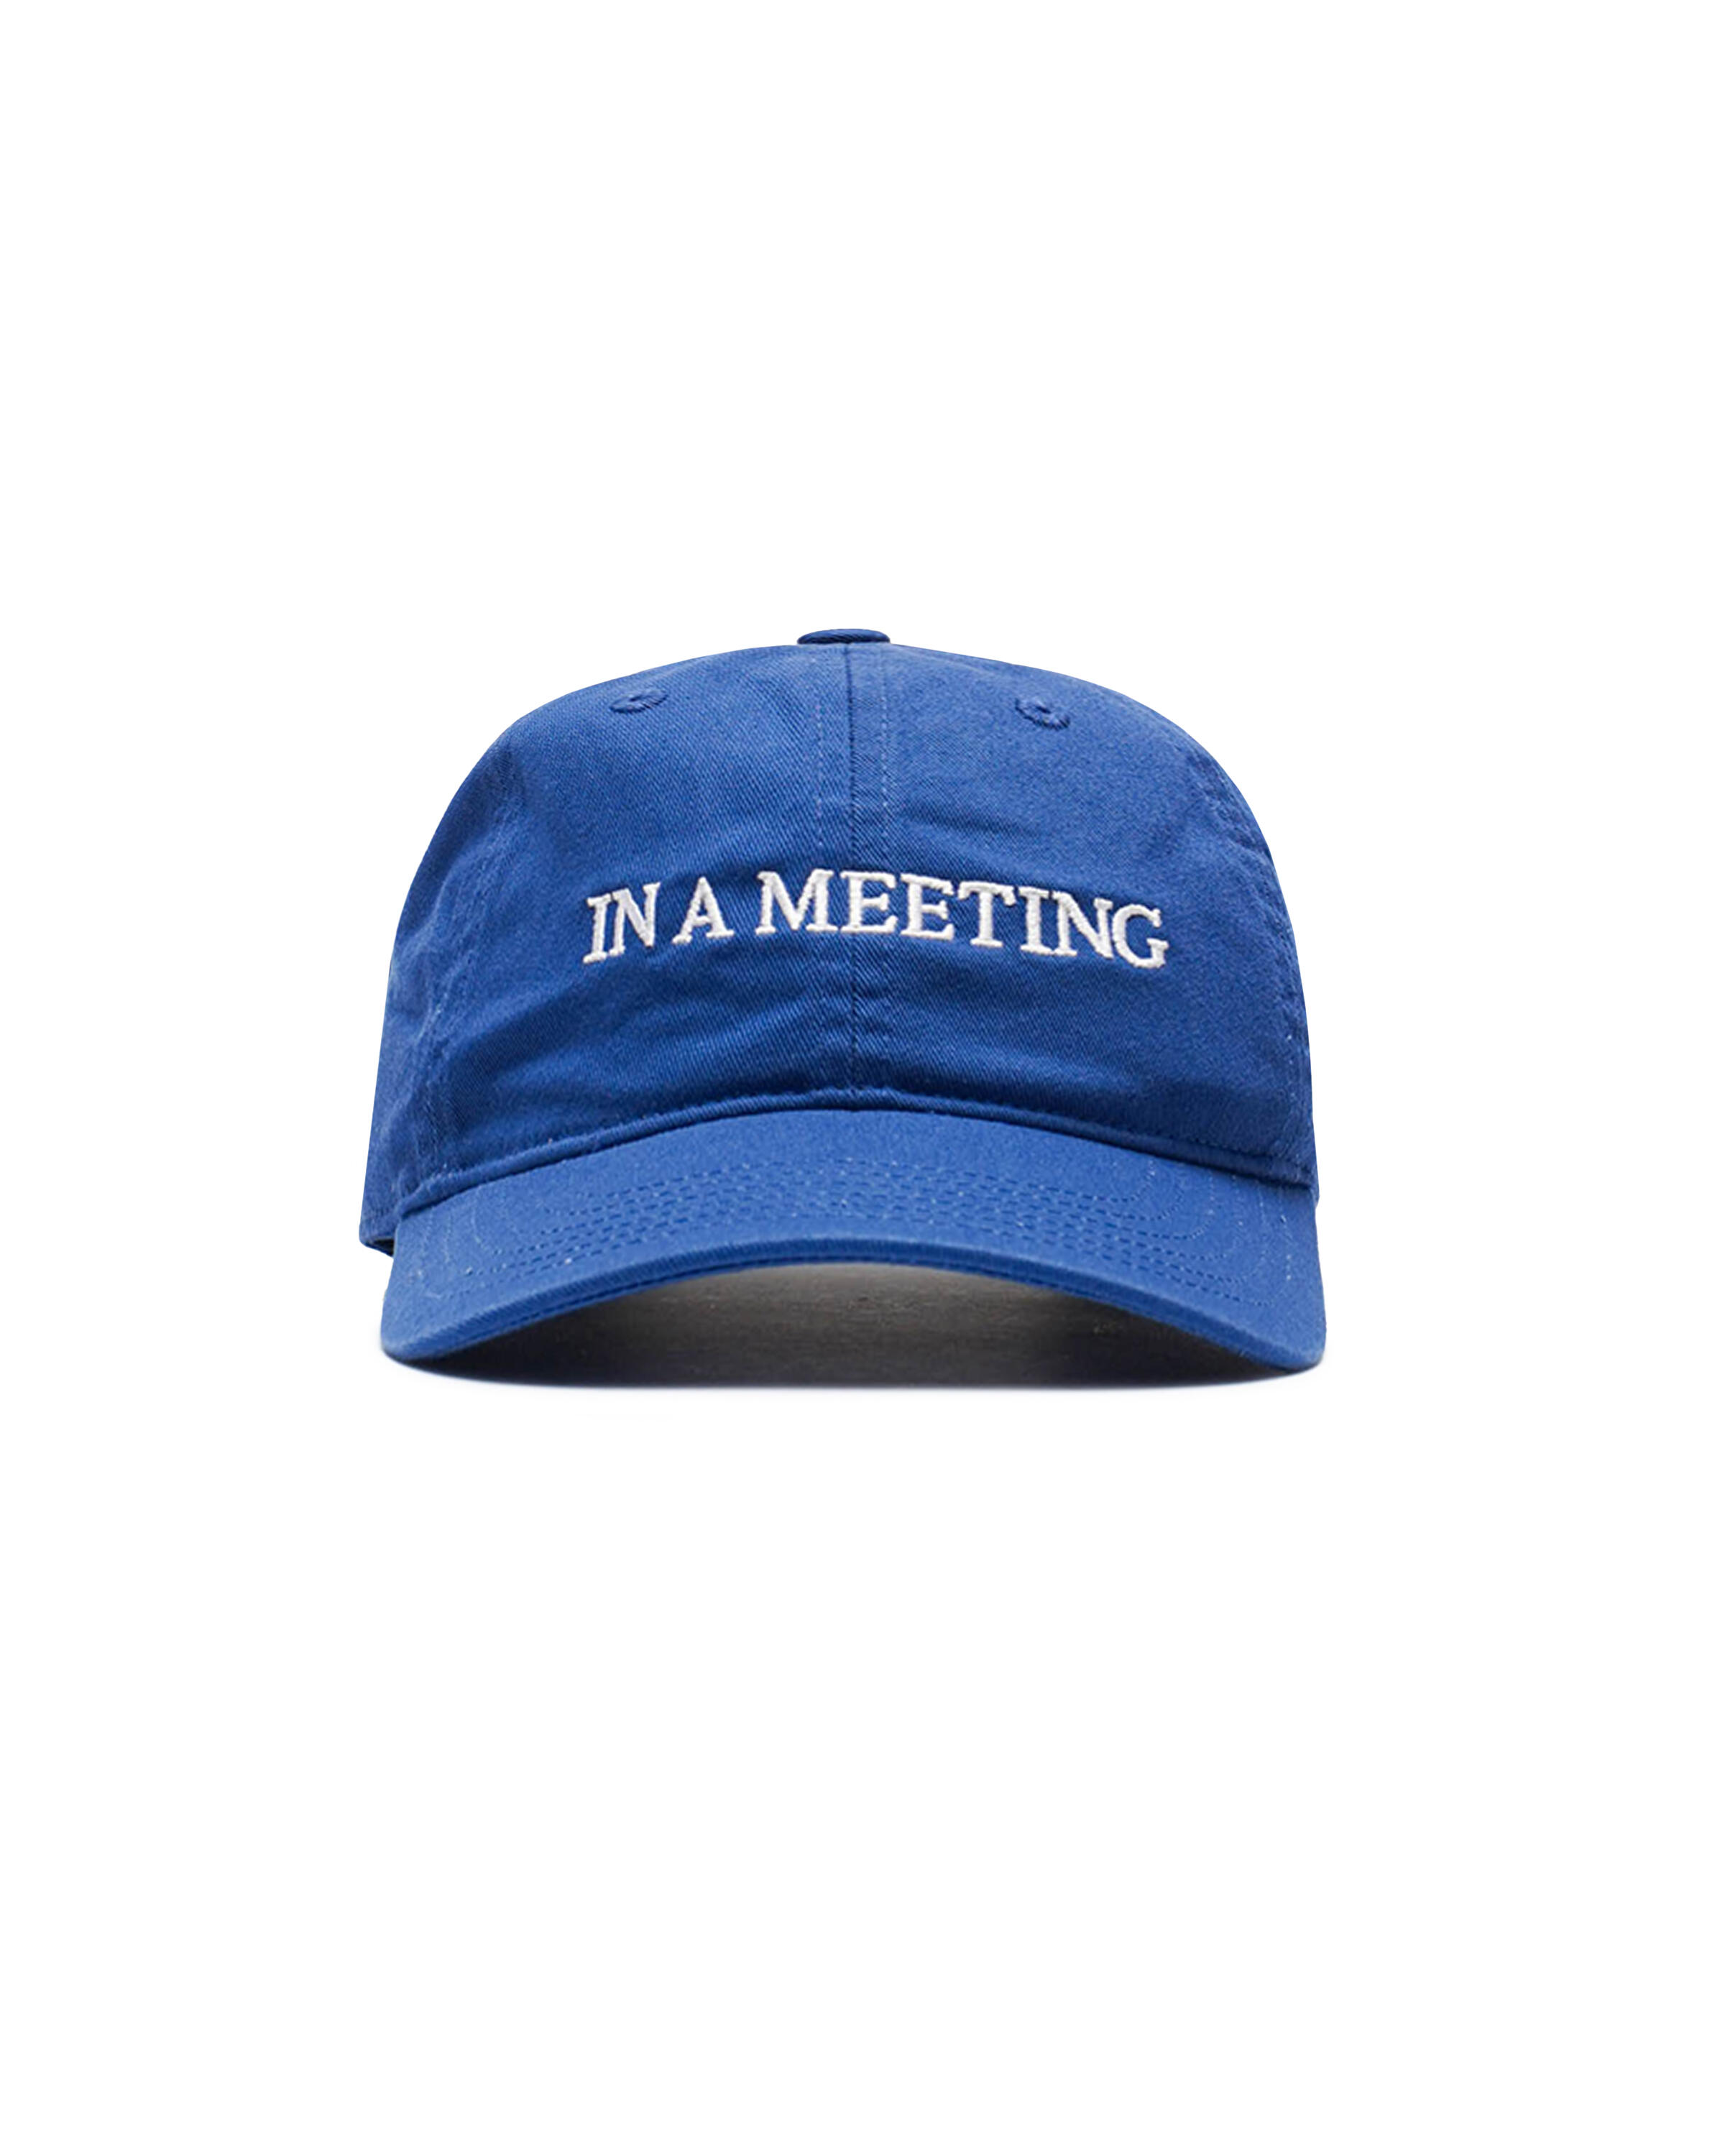 IDEA IN A MEETING HAT